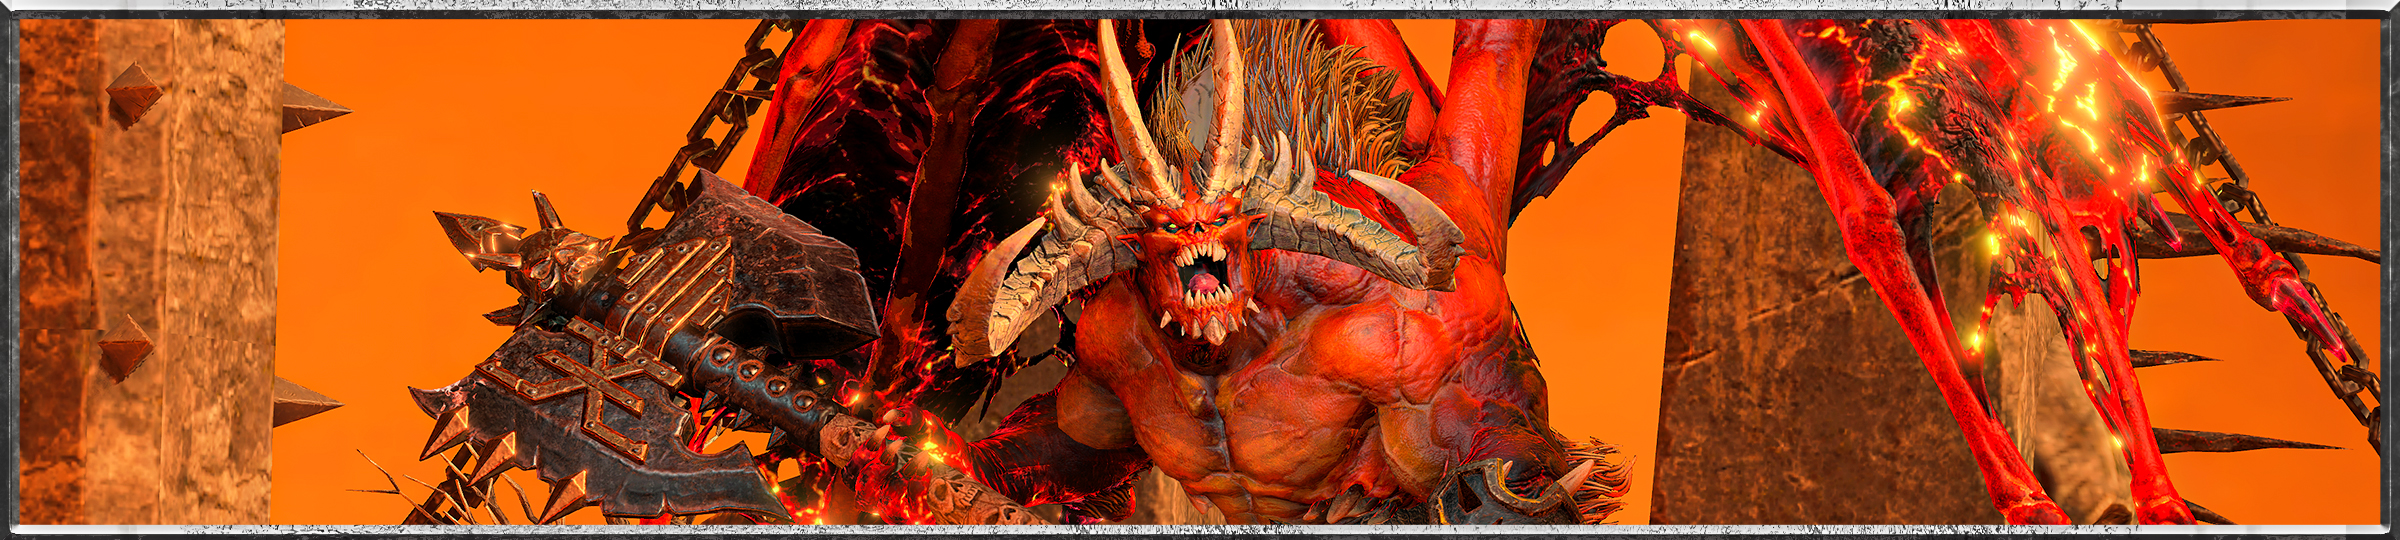 A roaring Bloodthirster faces the camera. Its hugely muscular frame holds a two handed axe horizontally, with flames engulfing the hands. Huge, fiery wings frame on either side, while two huge, curled horns adorn the side of its face, with two straighter horns pointing upwards from the top of the head.